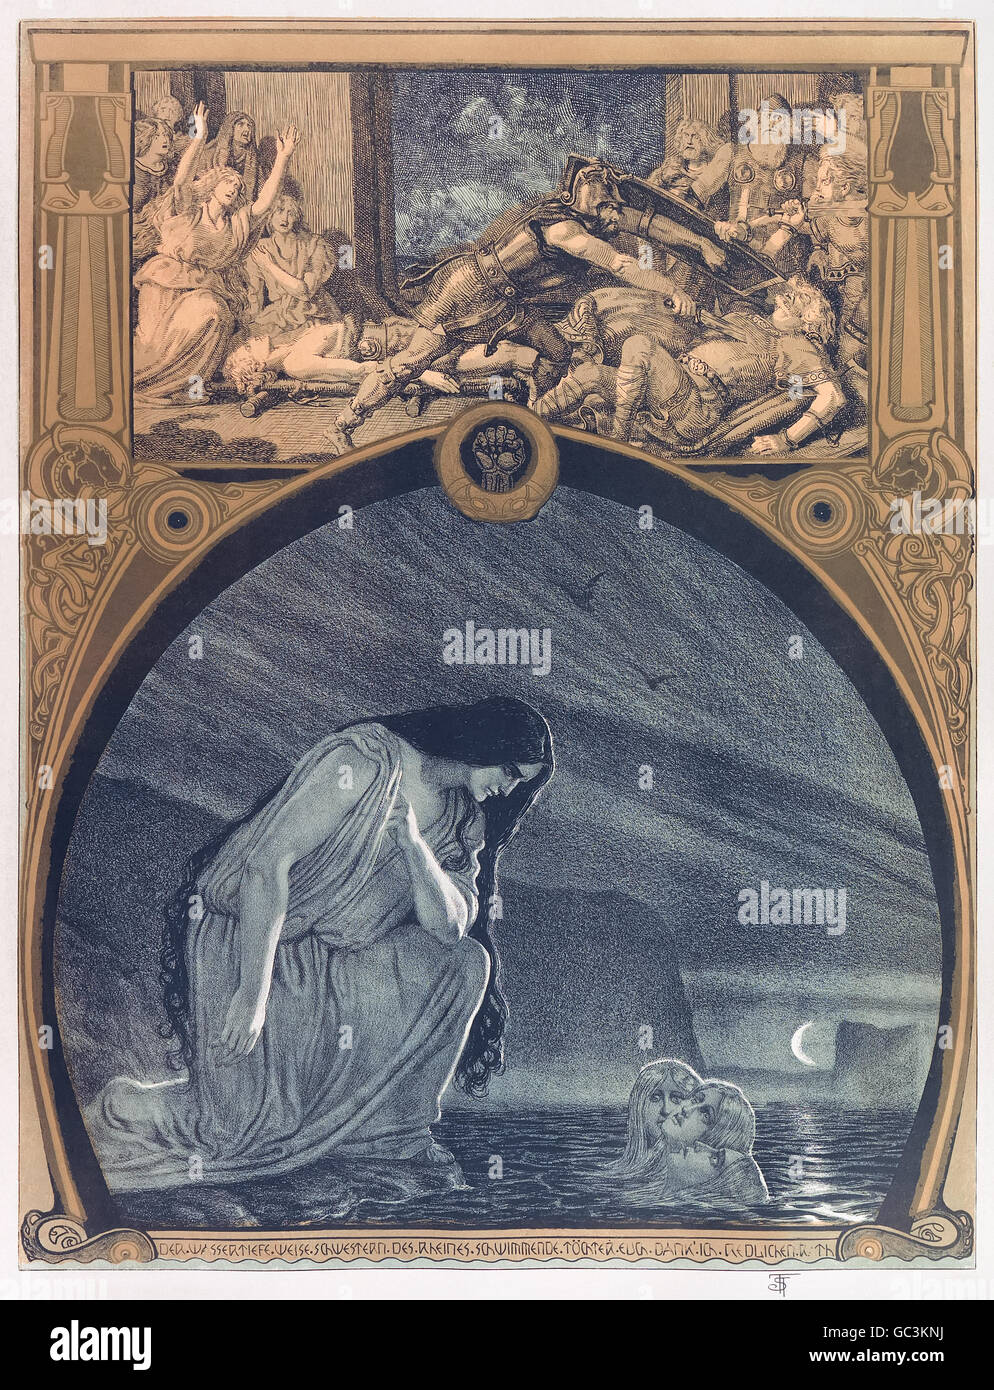 Franz Stassen (1869-1949) illustration for “Der Ring des Nibelungen (Götterdämmerung)” (The Ring of the Nibelung: Part 4: Twilight of the Gods) by Richard Wagner (1813-1883). Brünnhilde tells the Rhinemaidens to take the ring from her ashes and sends Wotan's ravens home. See description for more information. Stock Photo